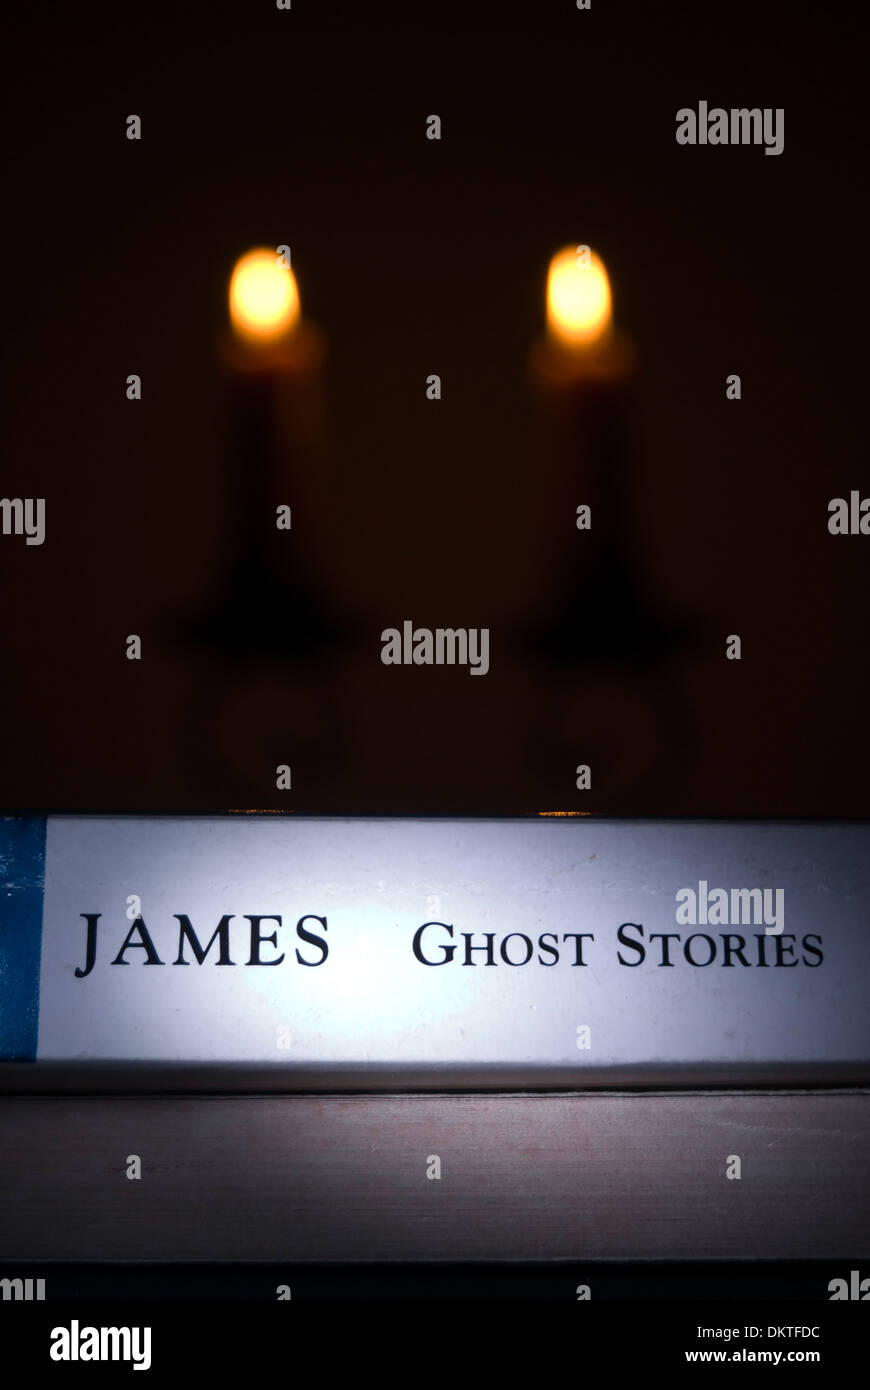 book of ghost stories by author m.r.james, with candles Stock Photo